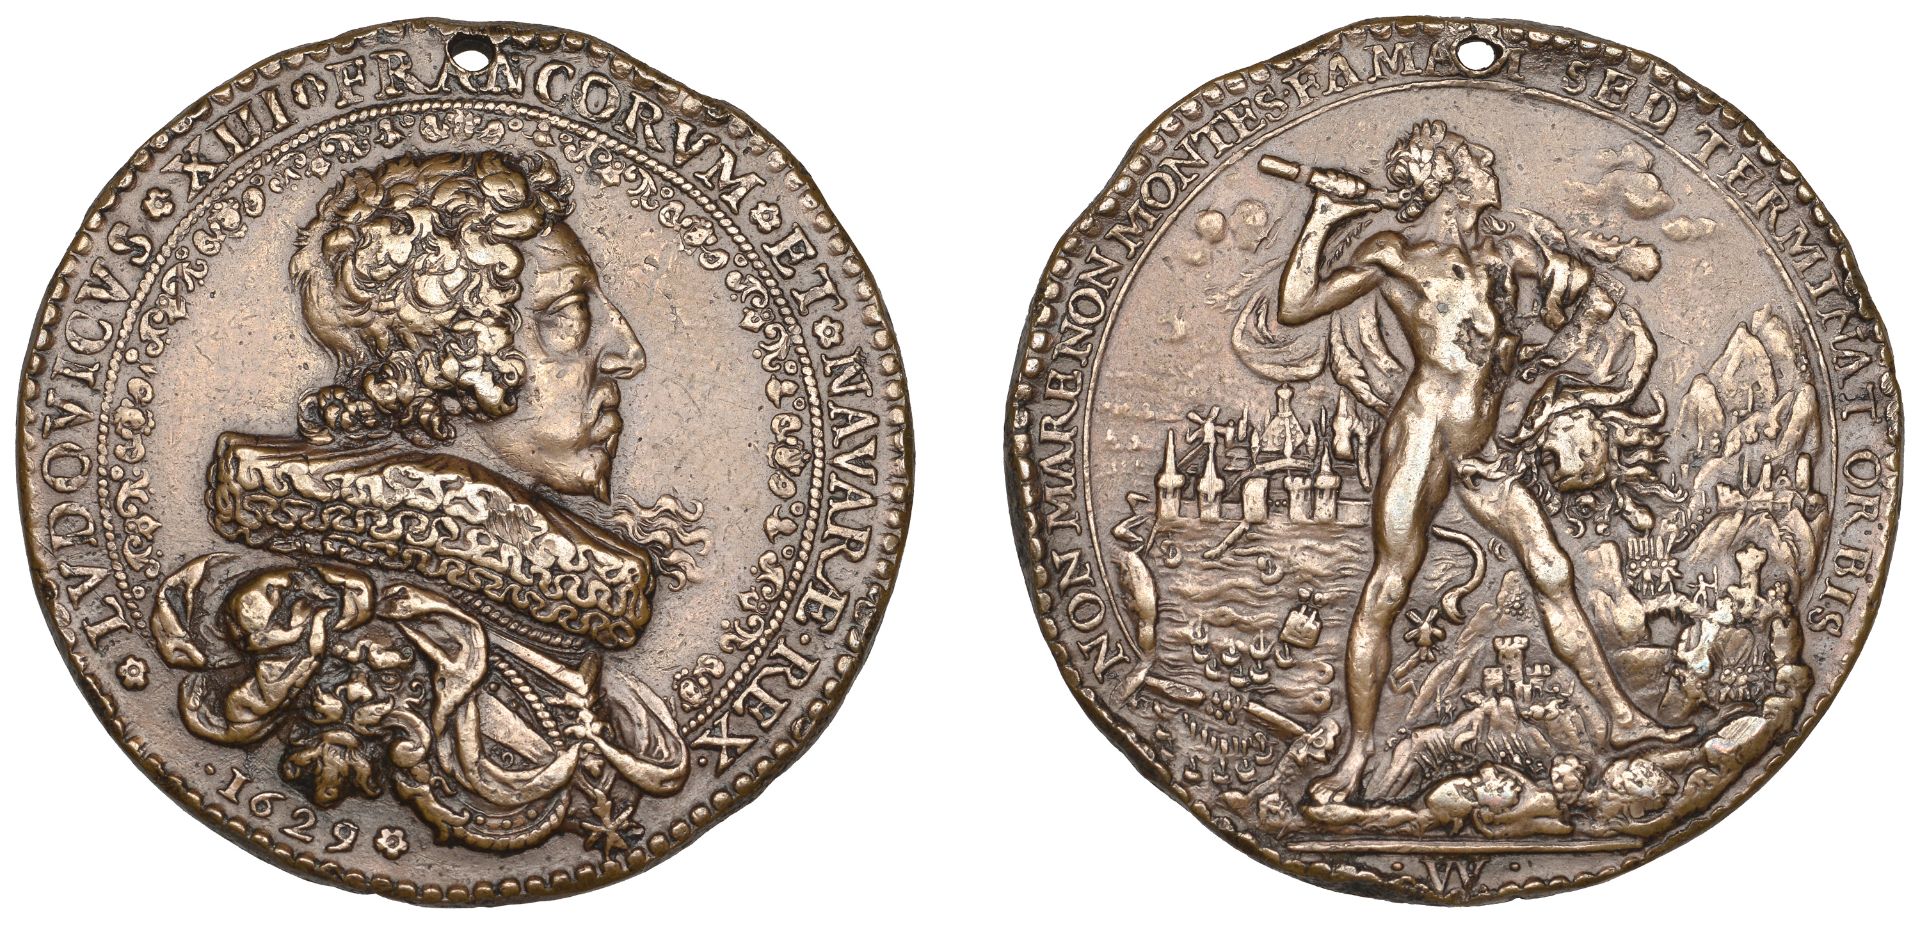 FRANCE, Passage of the Pas de Suze, 1629, a bronze medal by J. Warin, bust of Louis XIII rig...